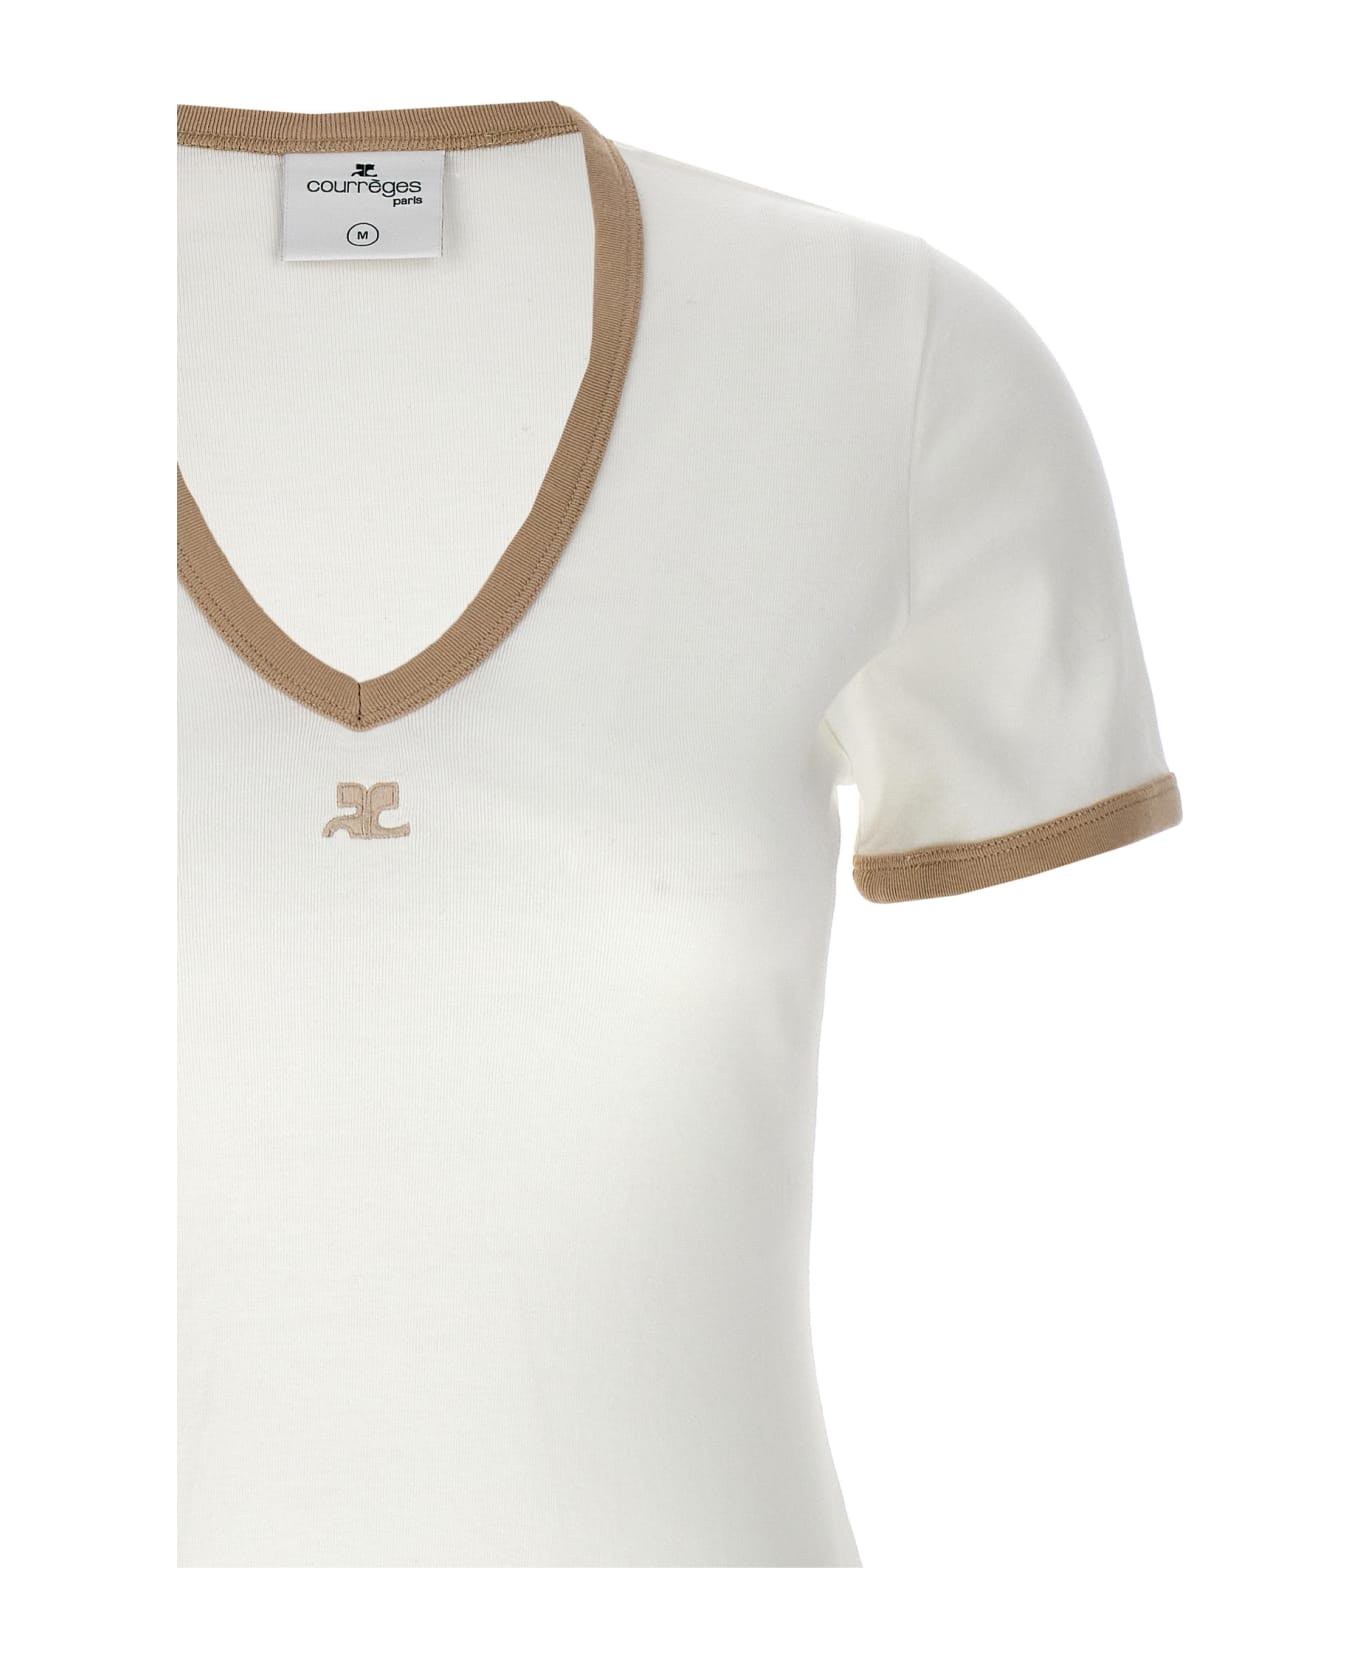 Courrèges Logo Embroidery Dress - White